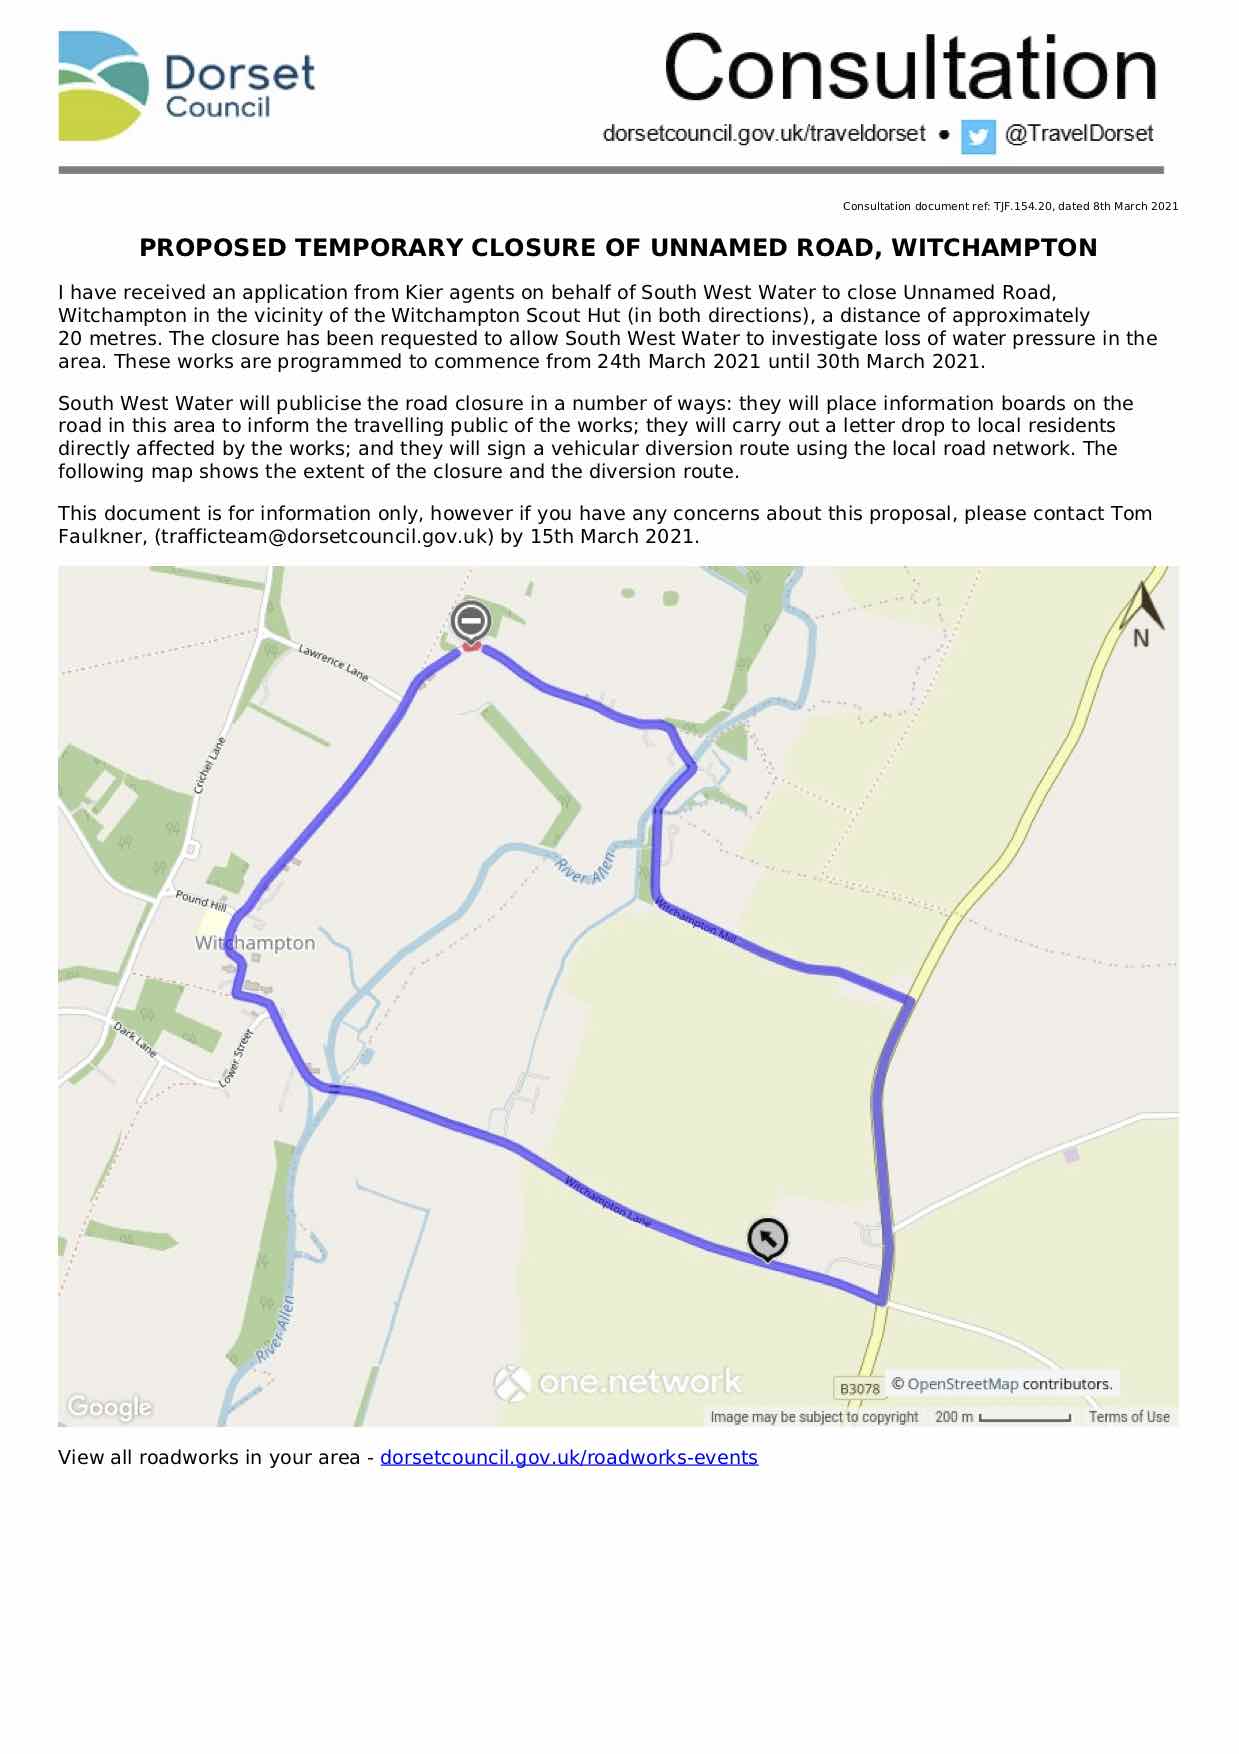 Image of the official consultation notice including the map